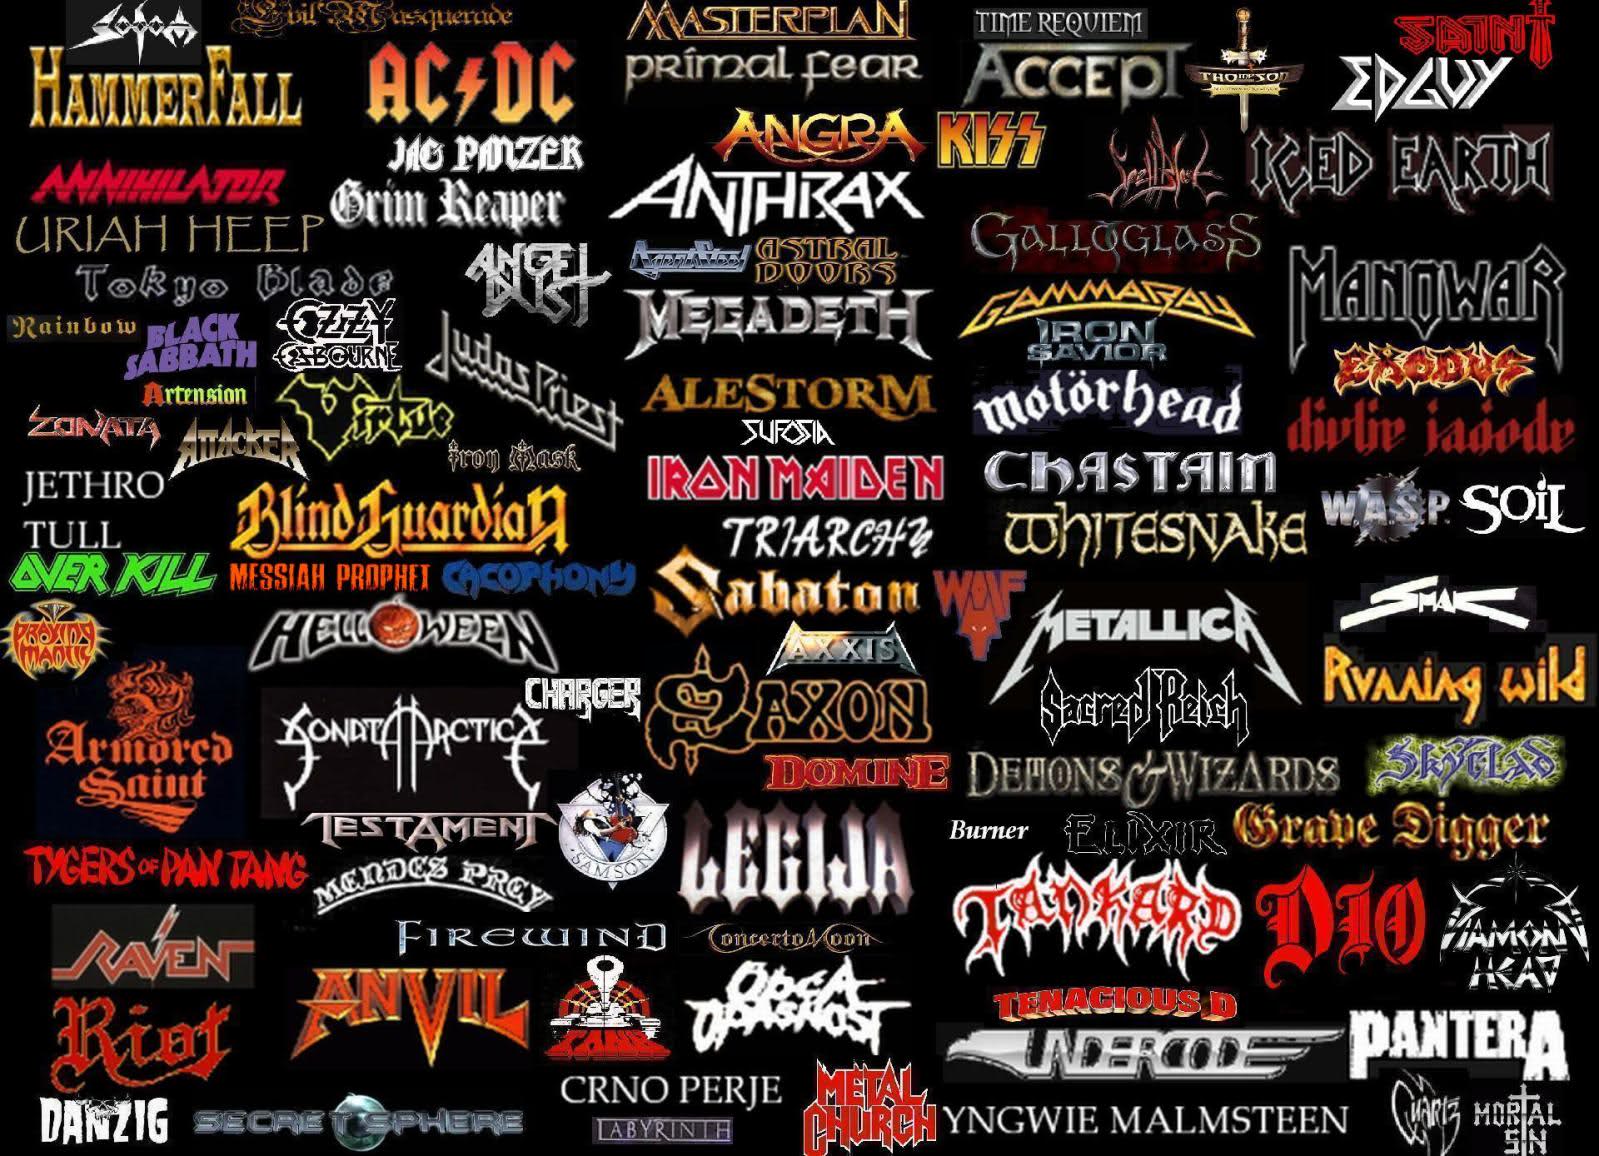 Heavy Metal Band Logo - The headbangers \m/\m/ images metal bands HD wallpaper and ...